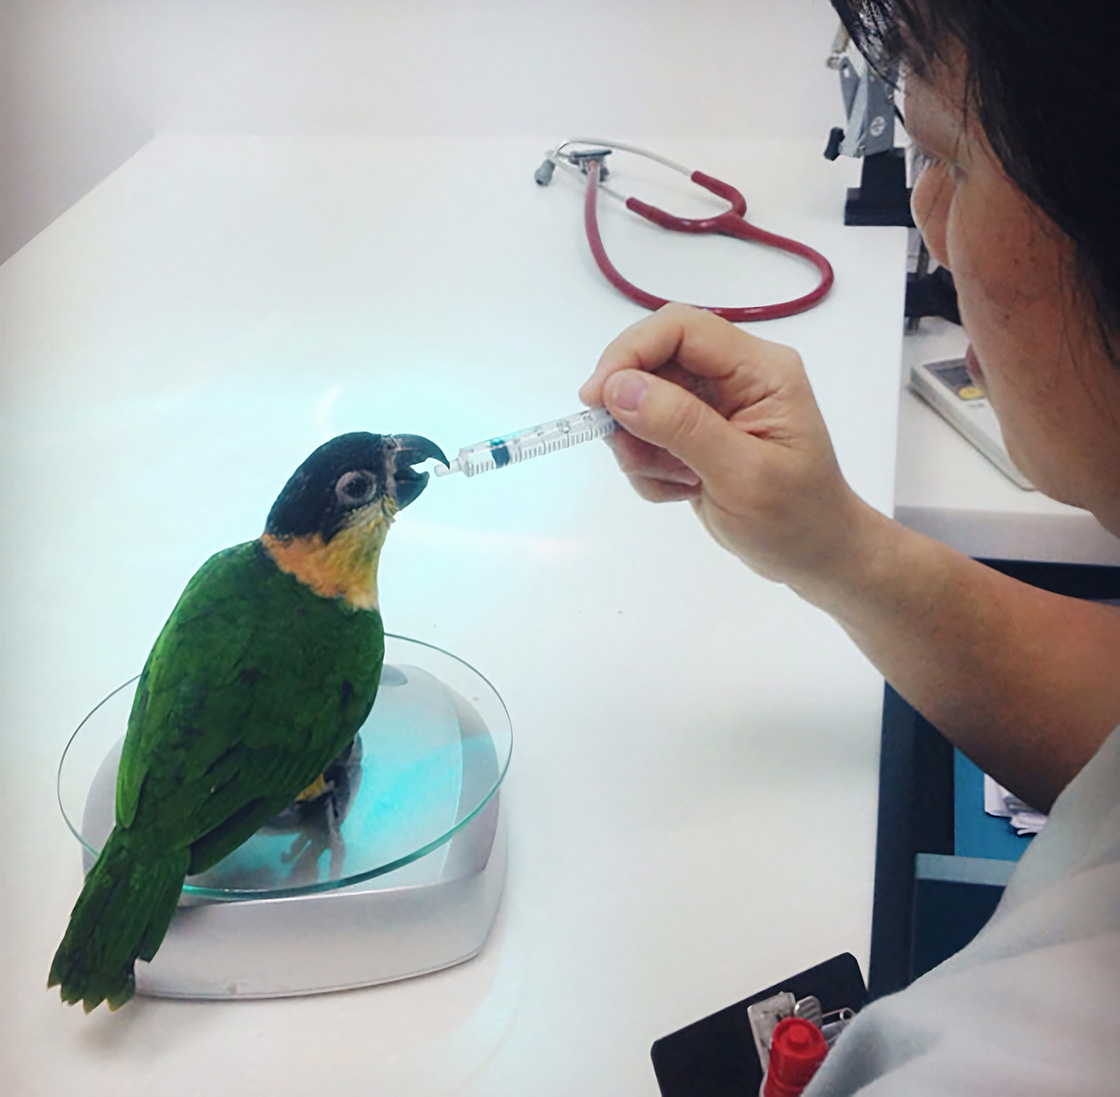 A veterinarian feeding a green parrot with a syringe, illustrating a bird during a feeding session at a vet clinic.